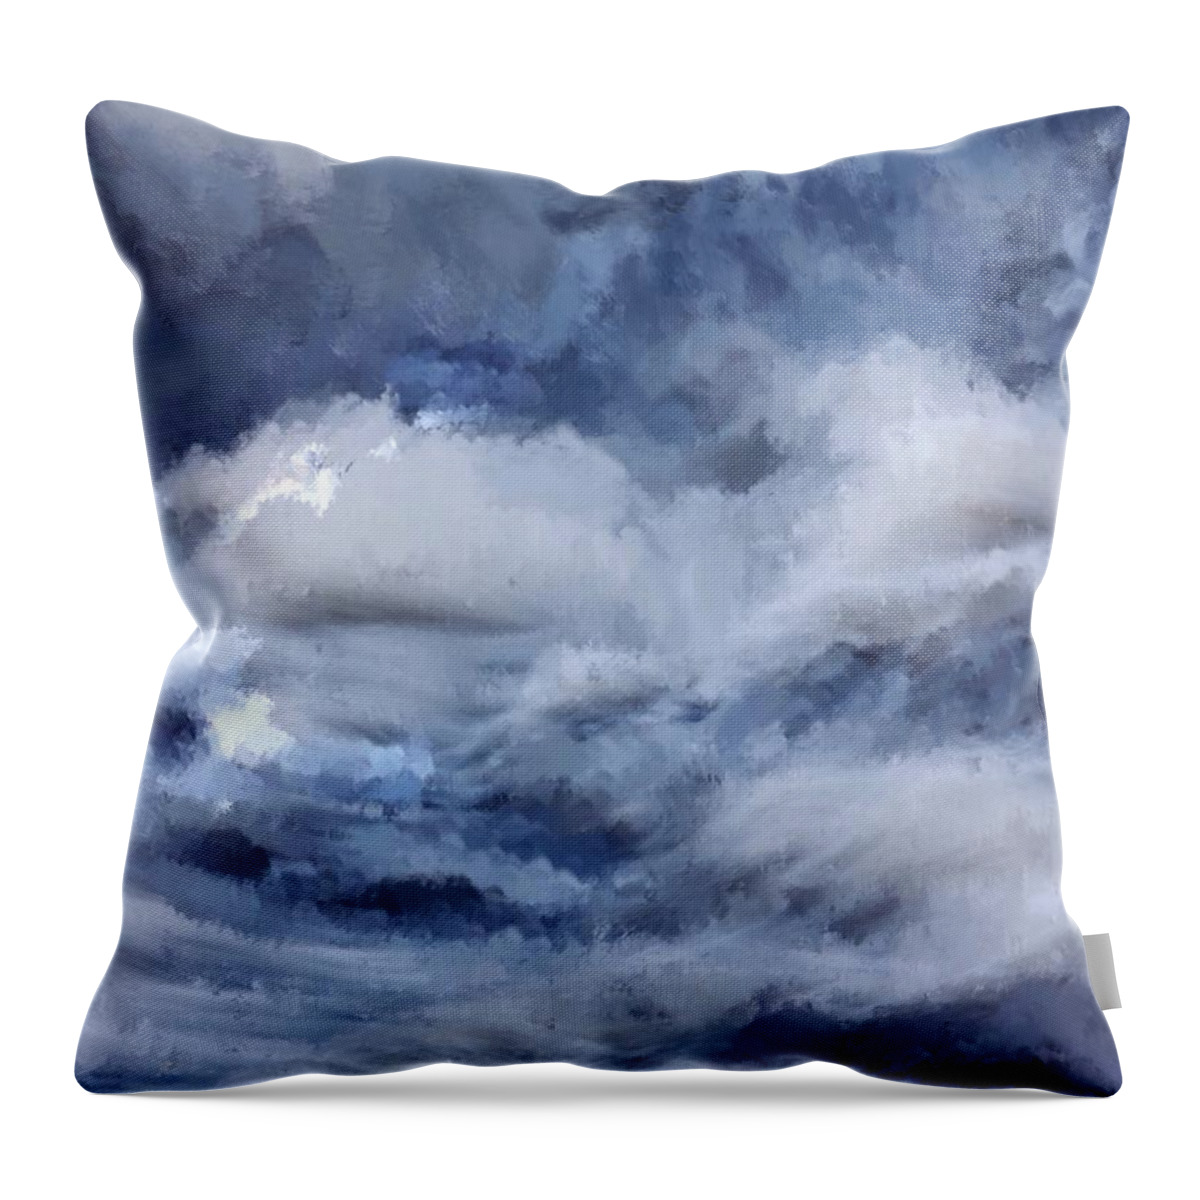 storm At Sea Throw Pillow featuring the painting Storm at Sea by Mark Taylor